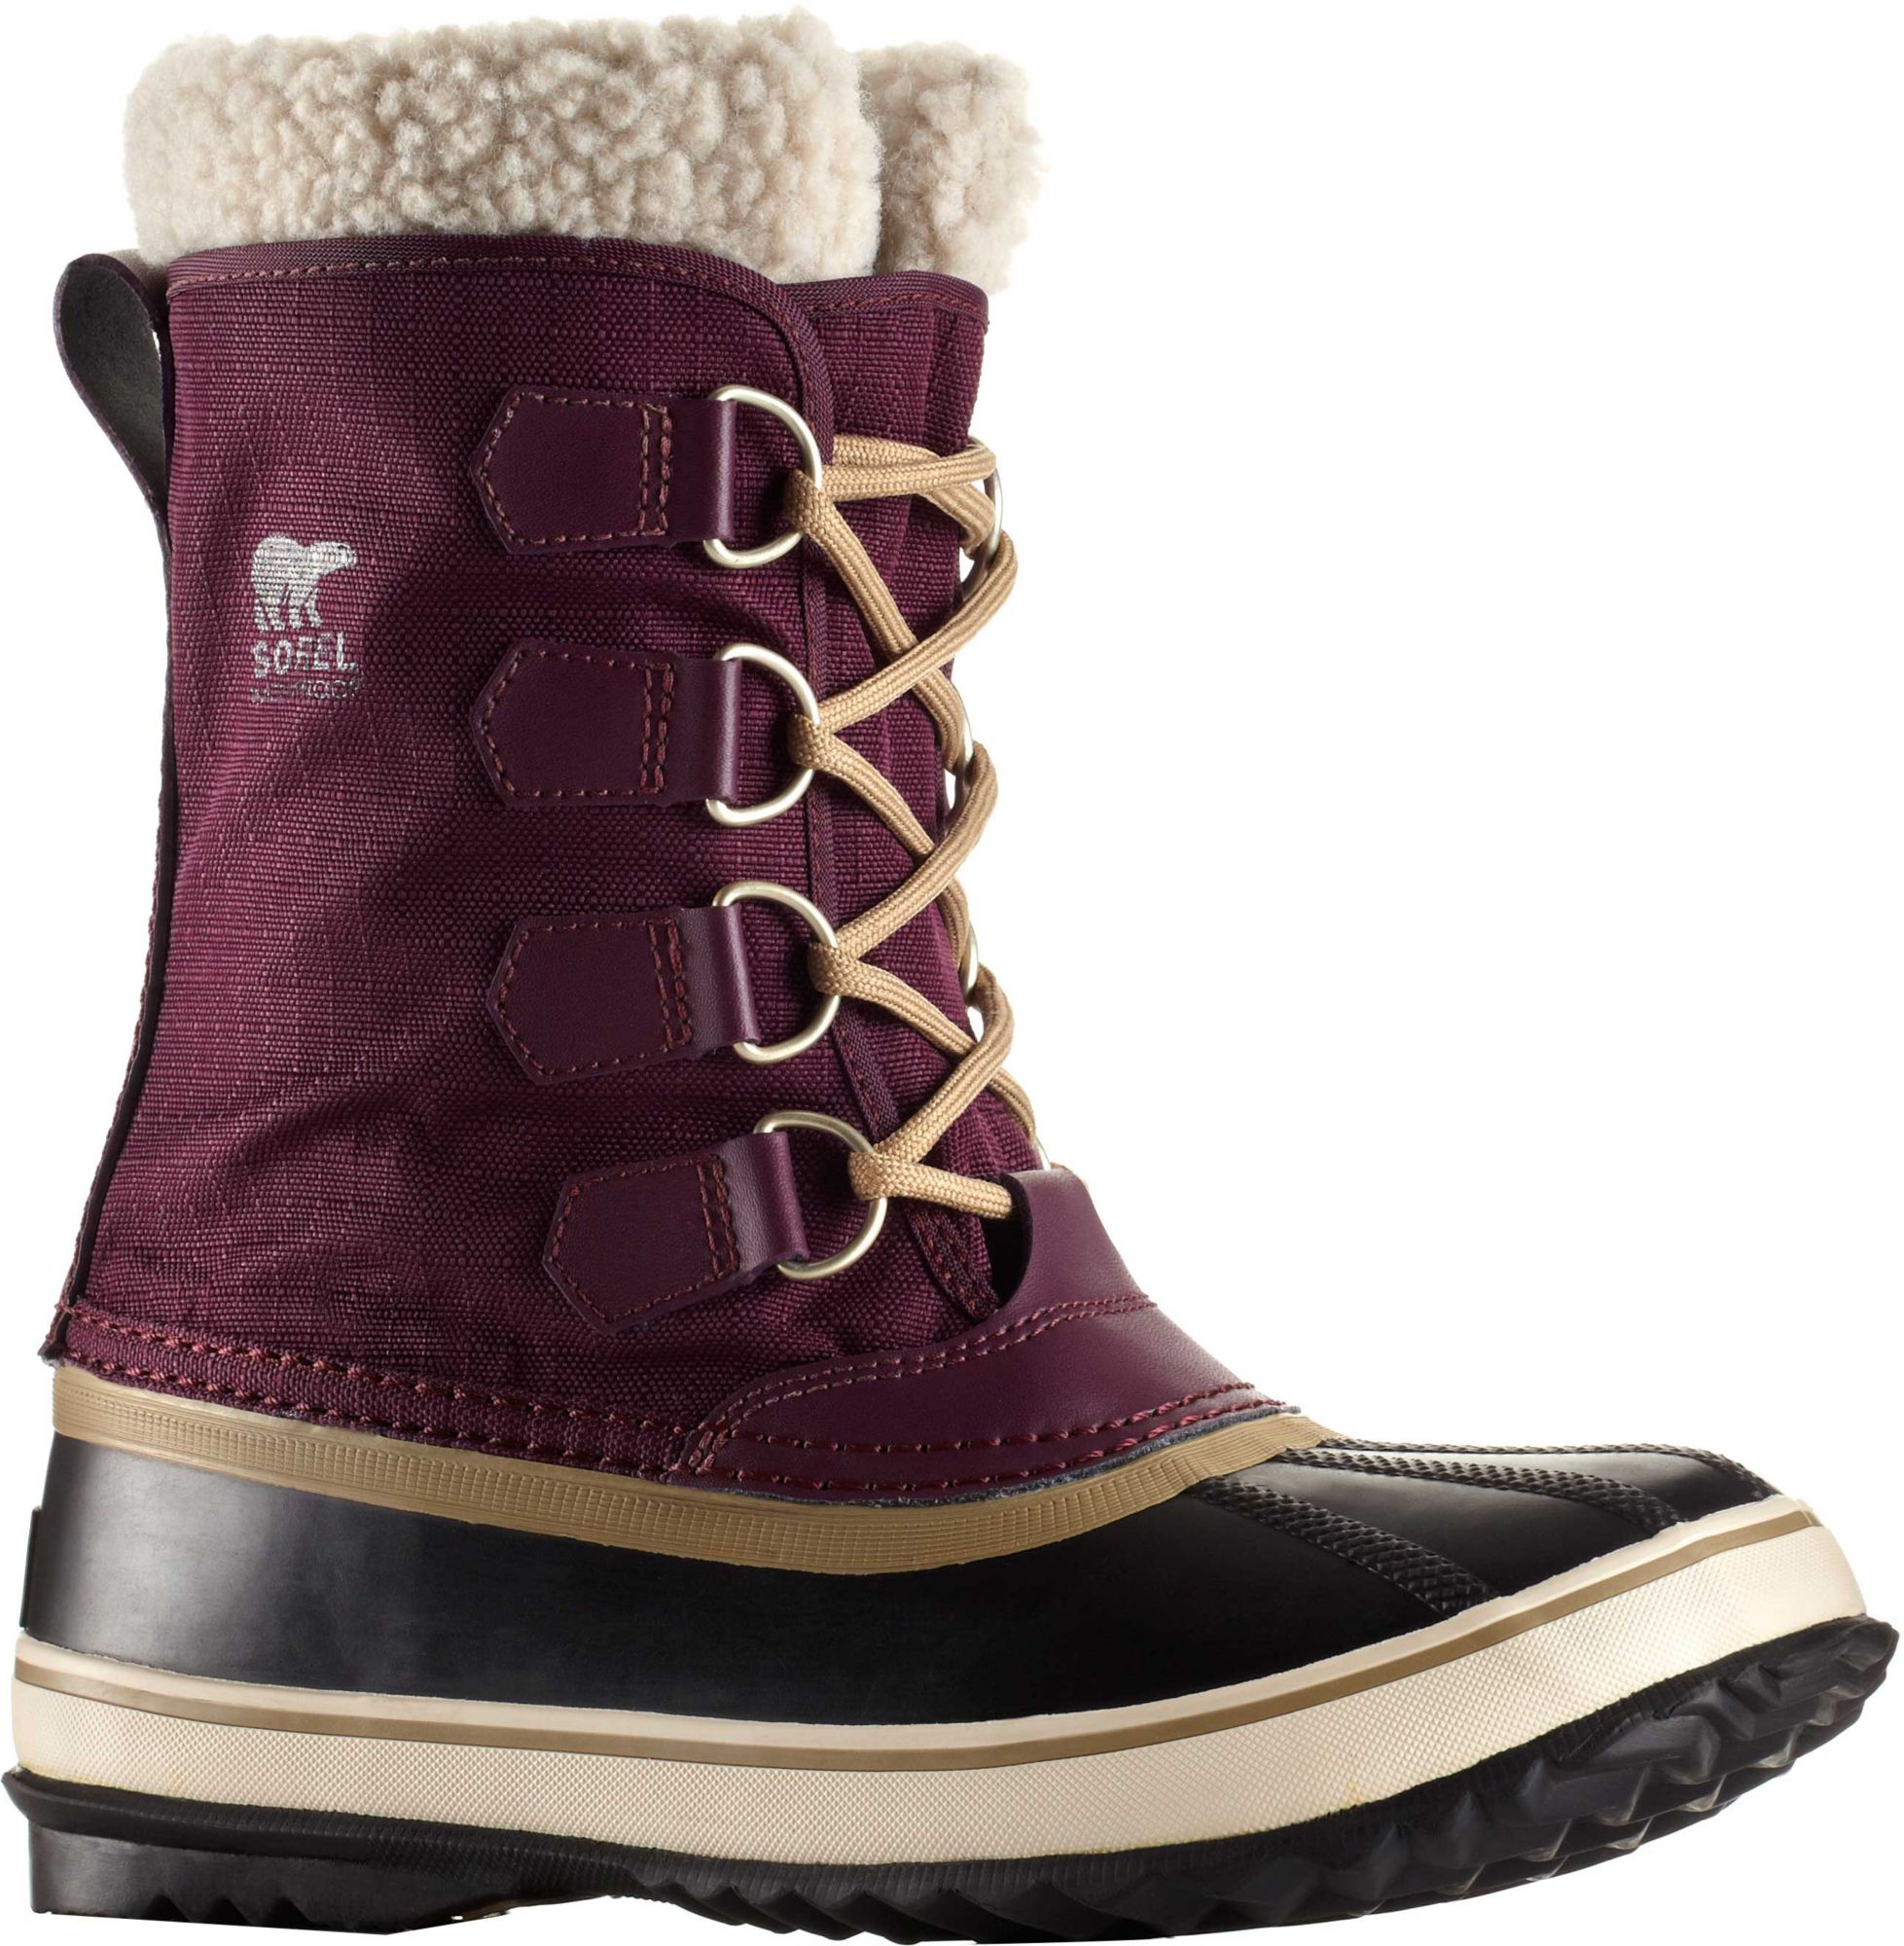 Have the perfect classy and stylish look by wearing women’s winter boots